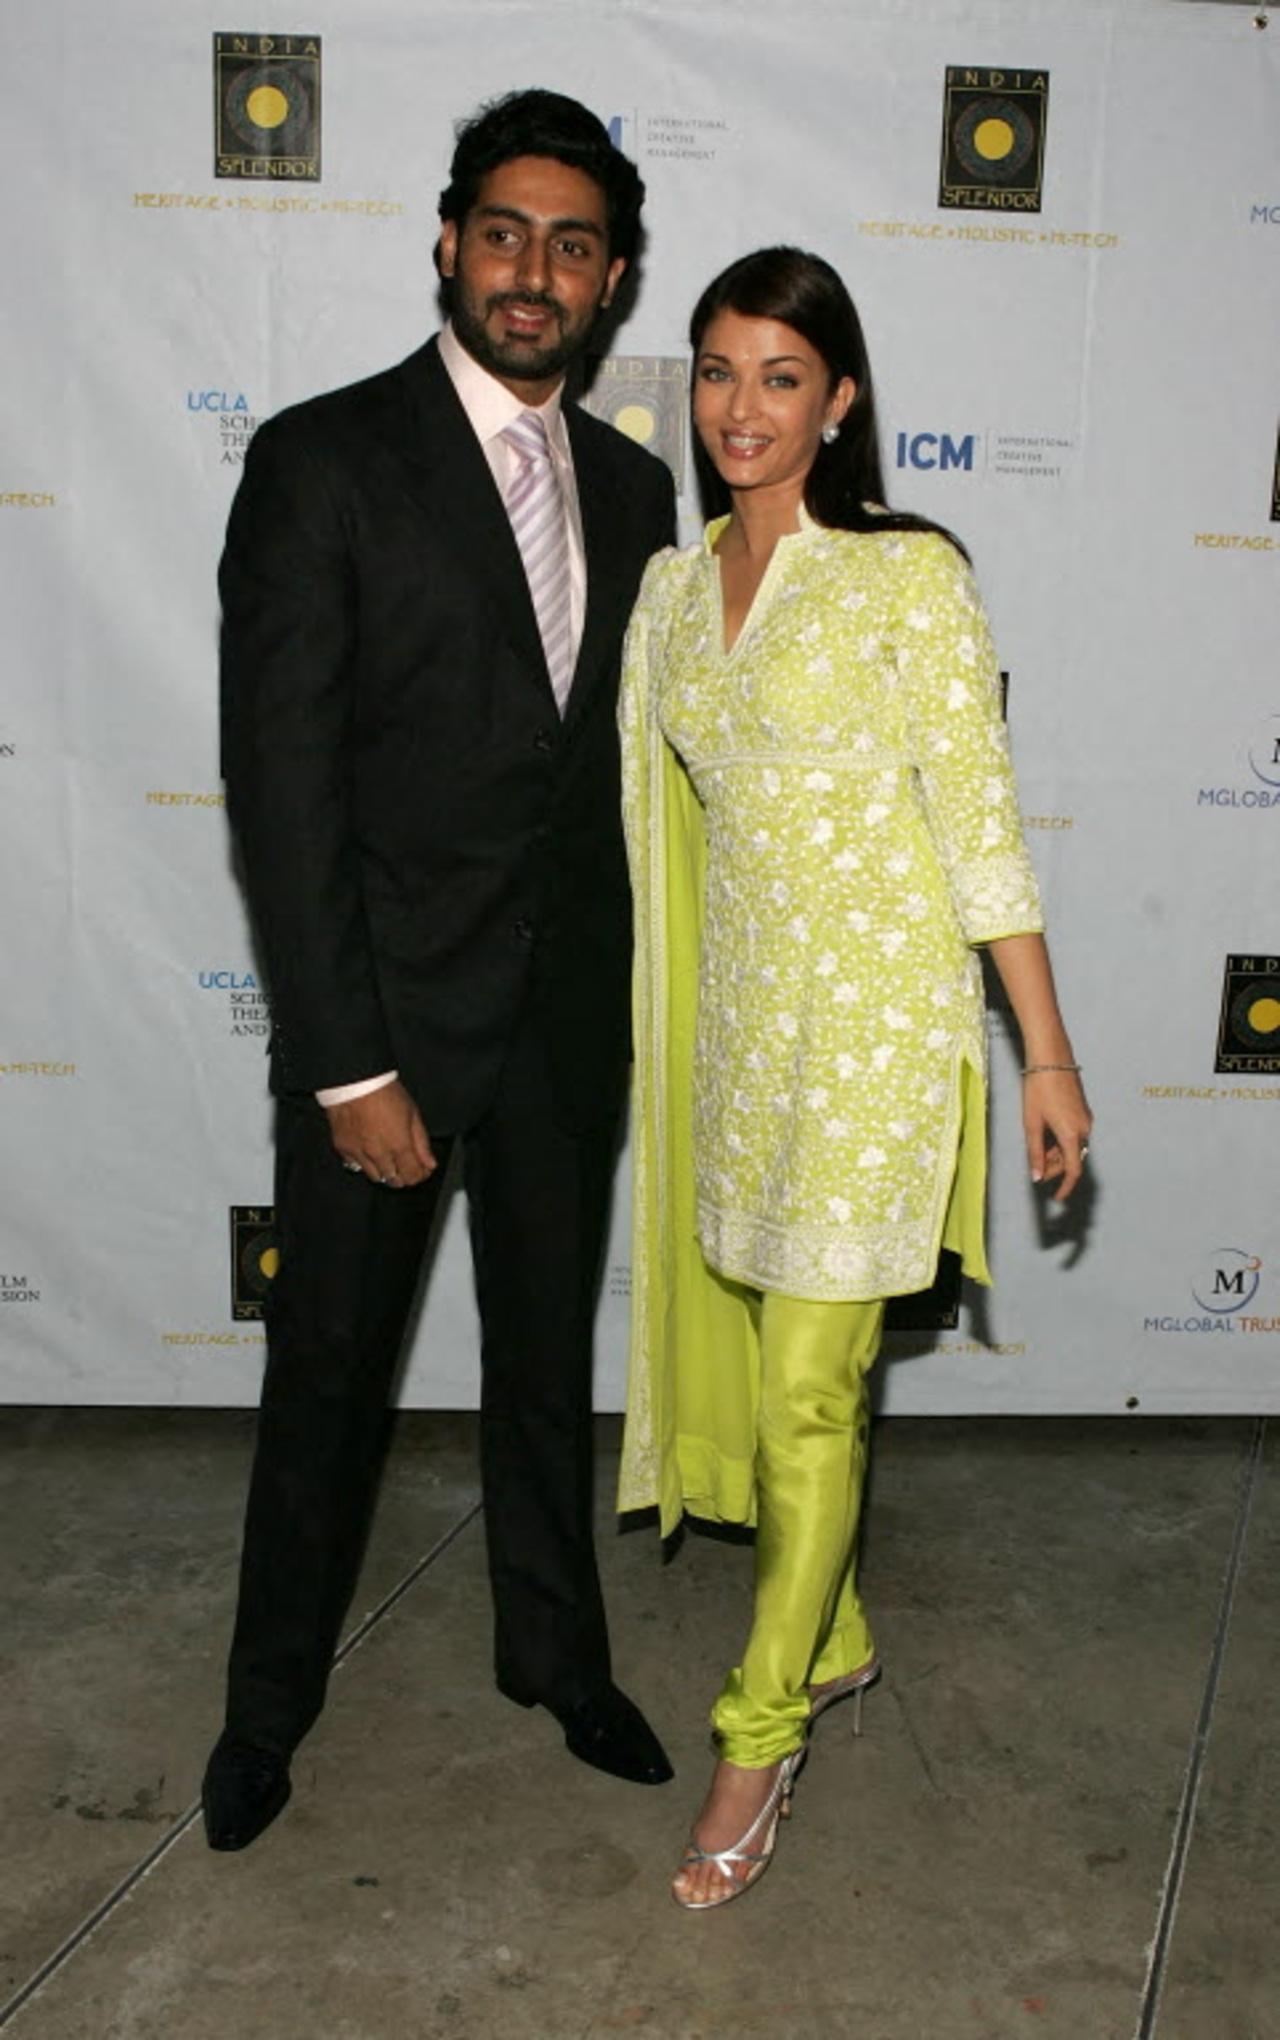 Here the two attend the screening Of ‘Guru’ at the Billy Wilder Theatre in Westwood, California. 